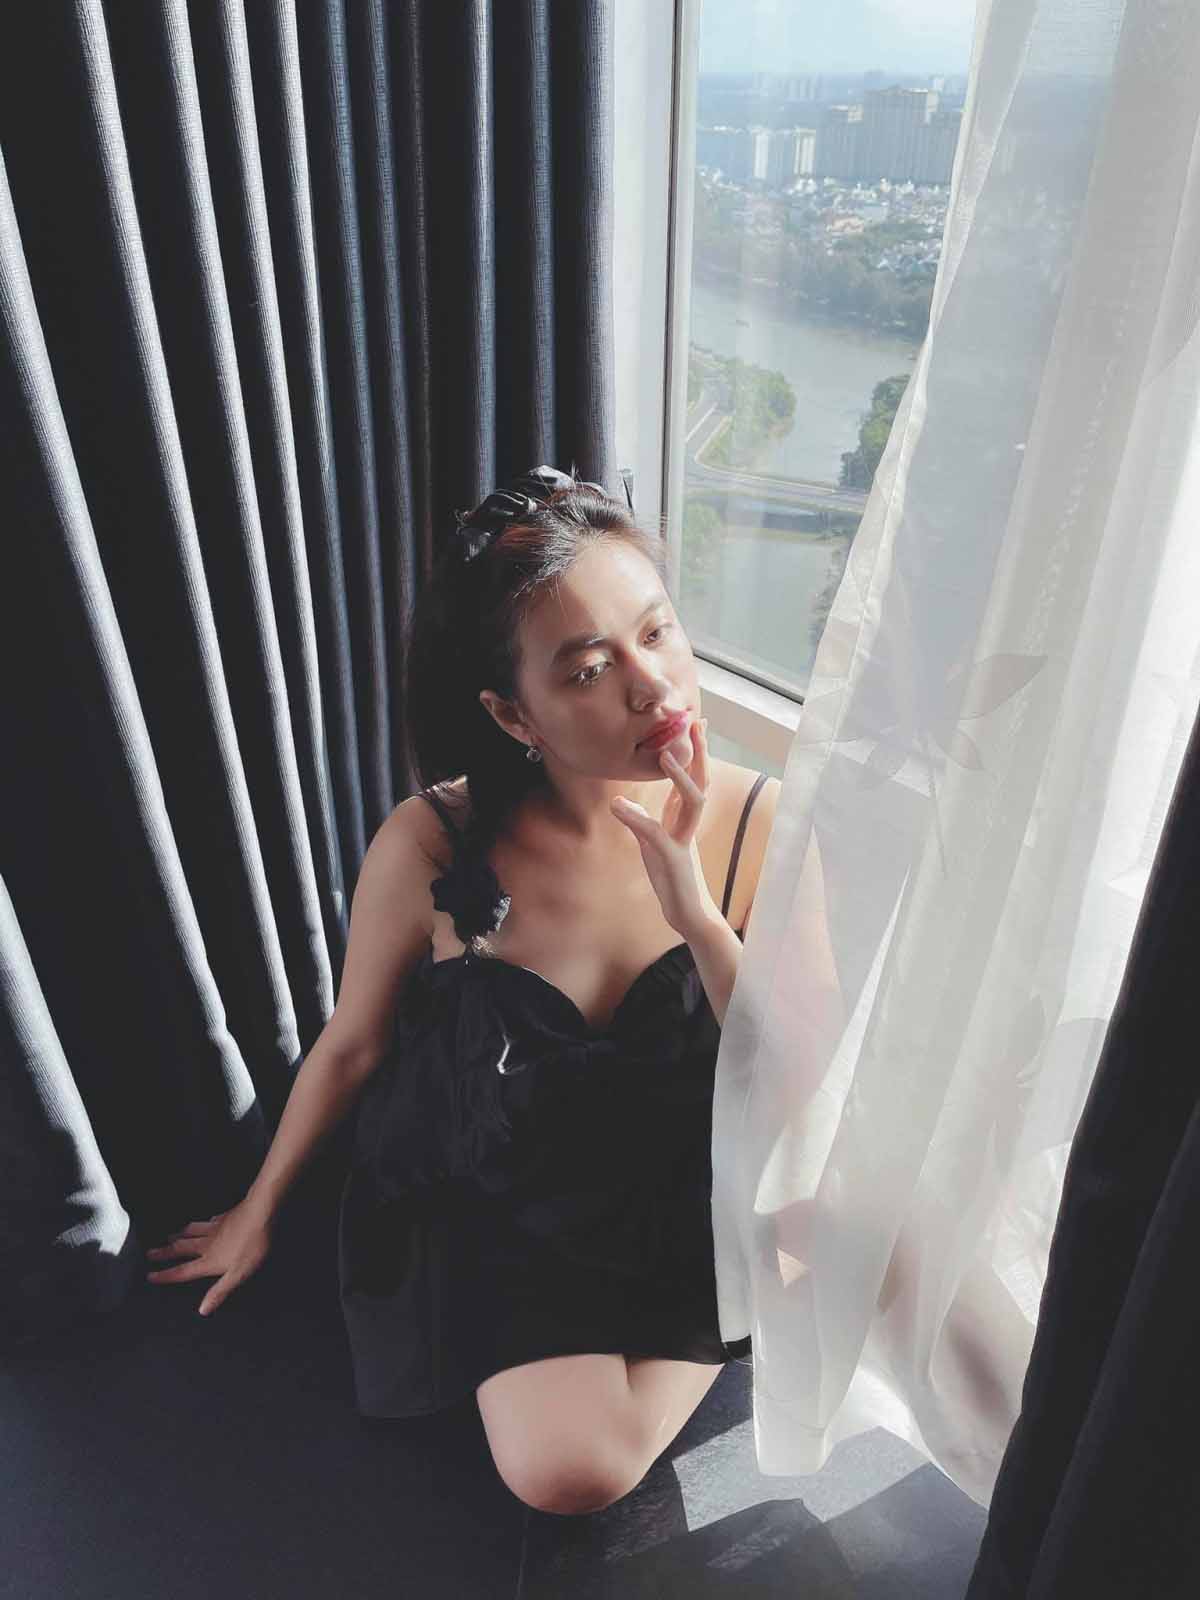 Hoang Thuy Linh wearing short clothes praised for her beauty at the age of 33-7